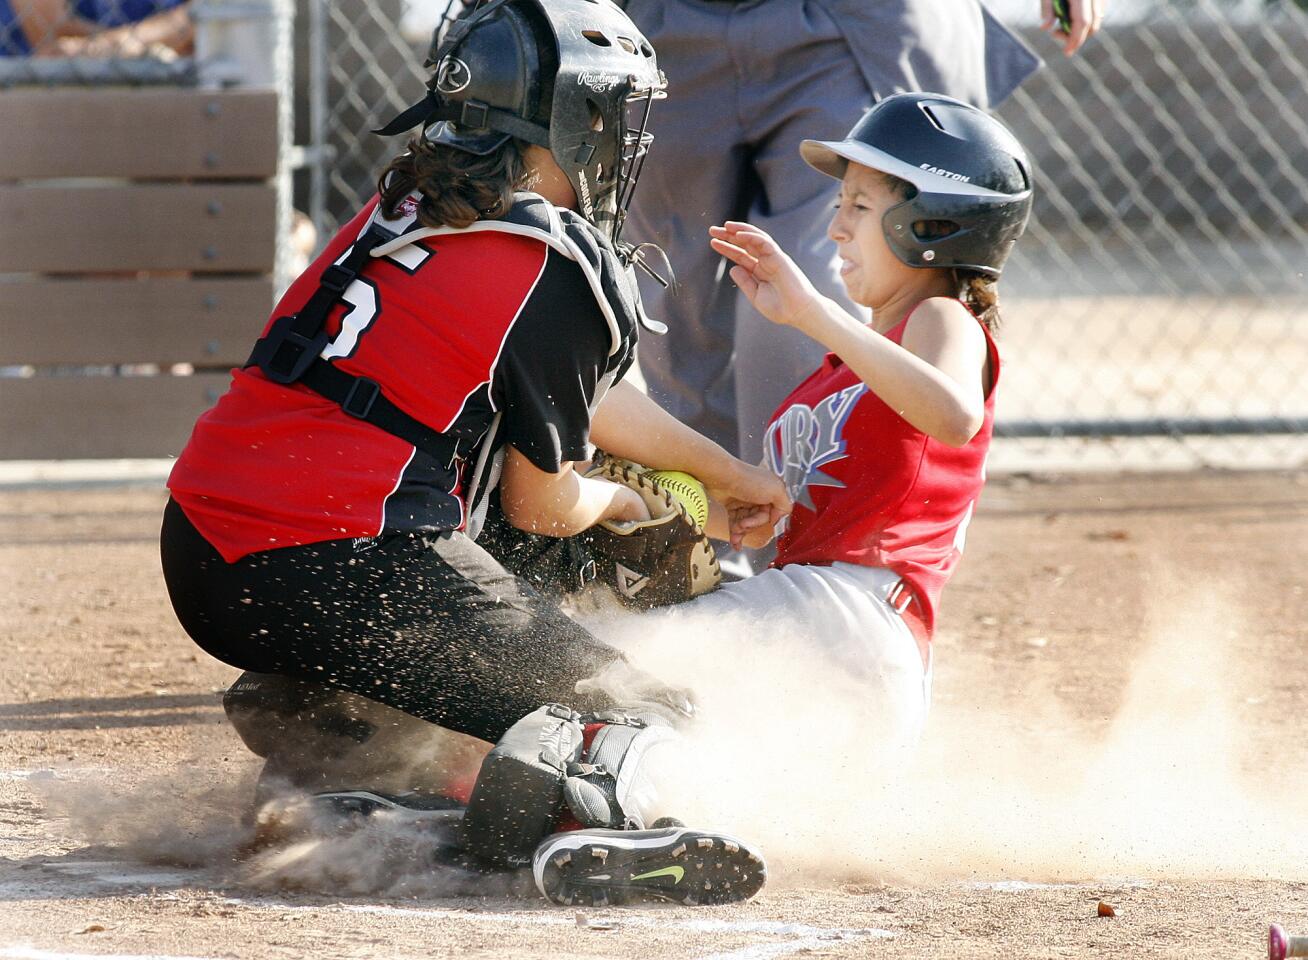 Tujunga Fury's Samantha Contreras, right, is tagged out at home by Glendale Firebelles' catcher Lacie Fradet in a Tri-Cities Junior softball game at Scholl Canyon Ball Fields in Glendale.